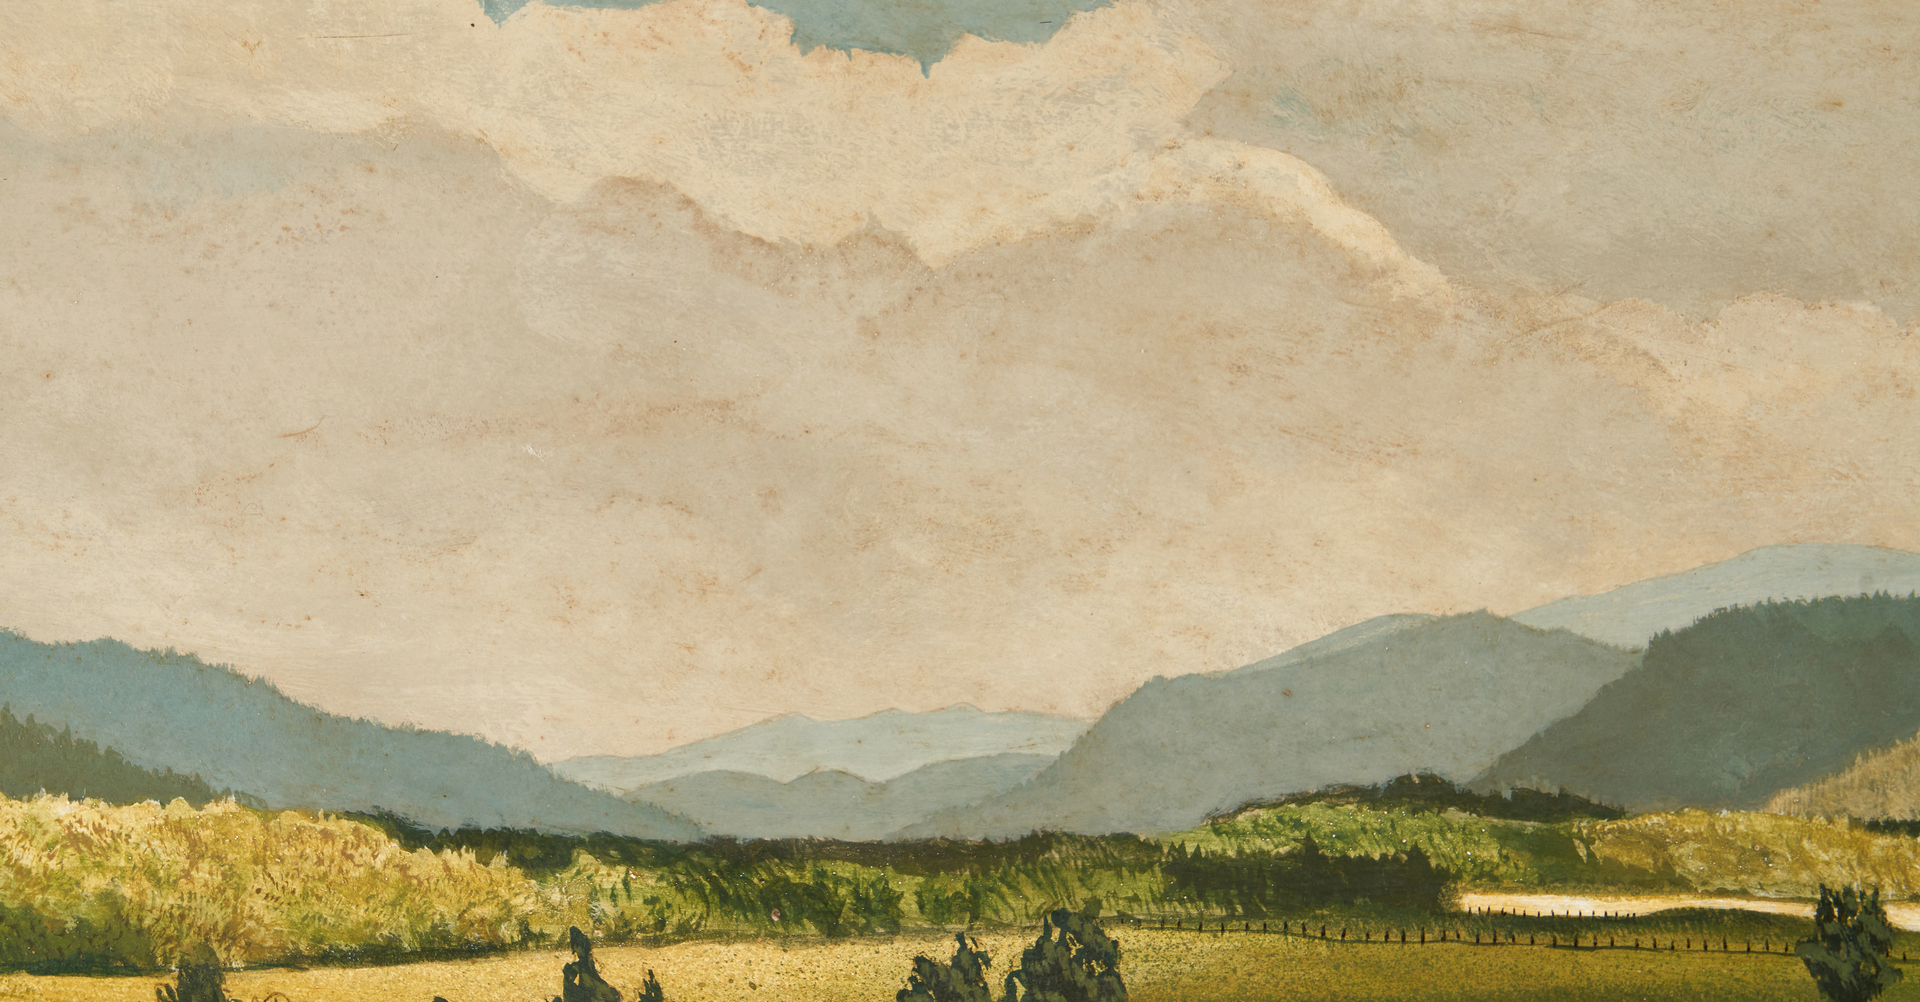 Lot 166: John Chumley Cades Cove Oil on Board Painting